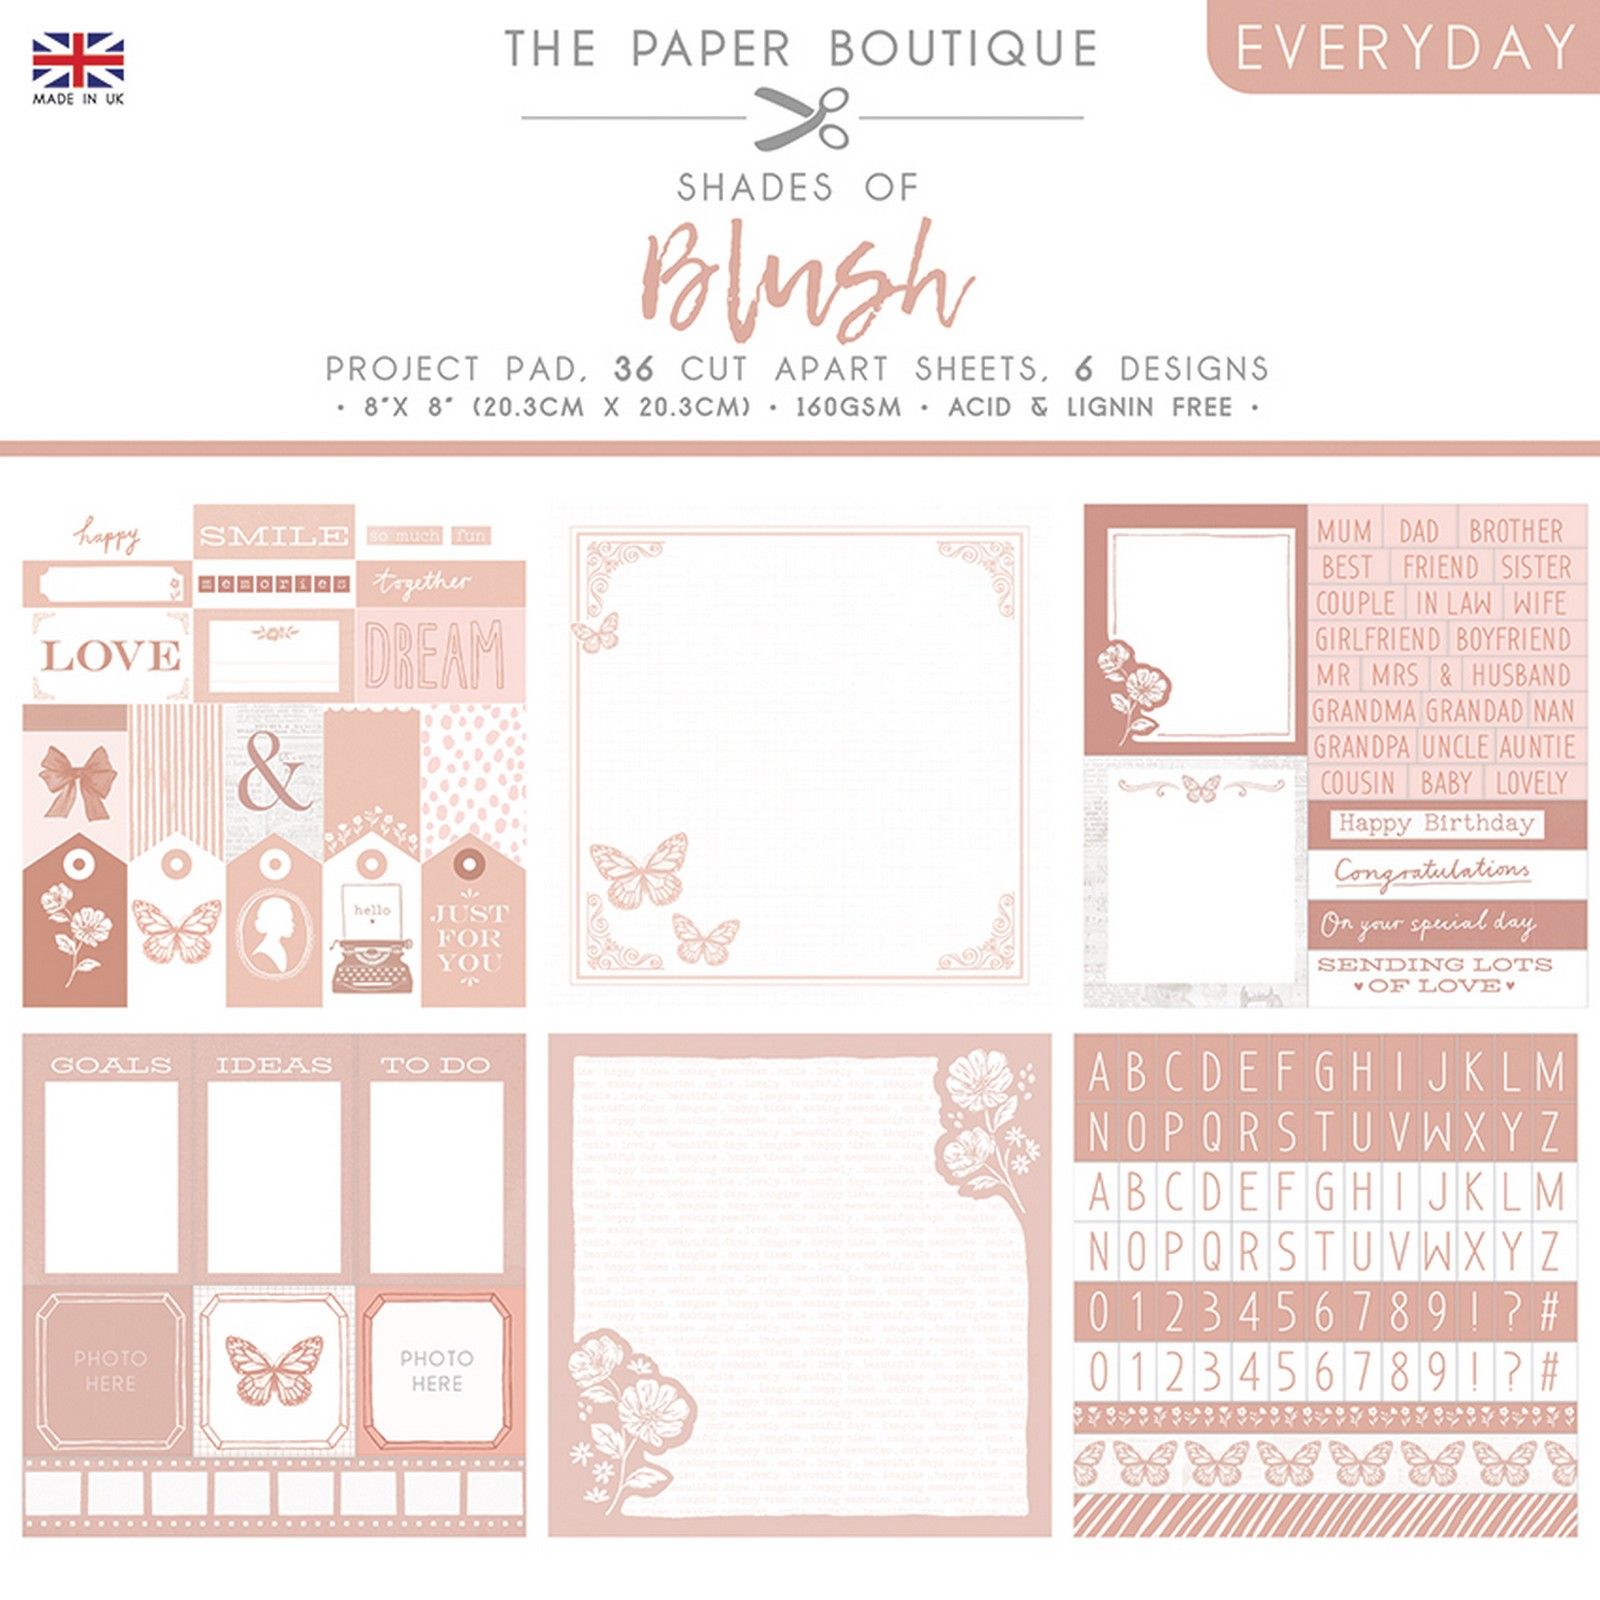 The Paper Boutique • Everyday shades of Blush project pad